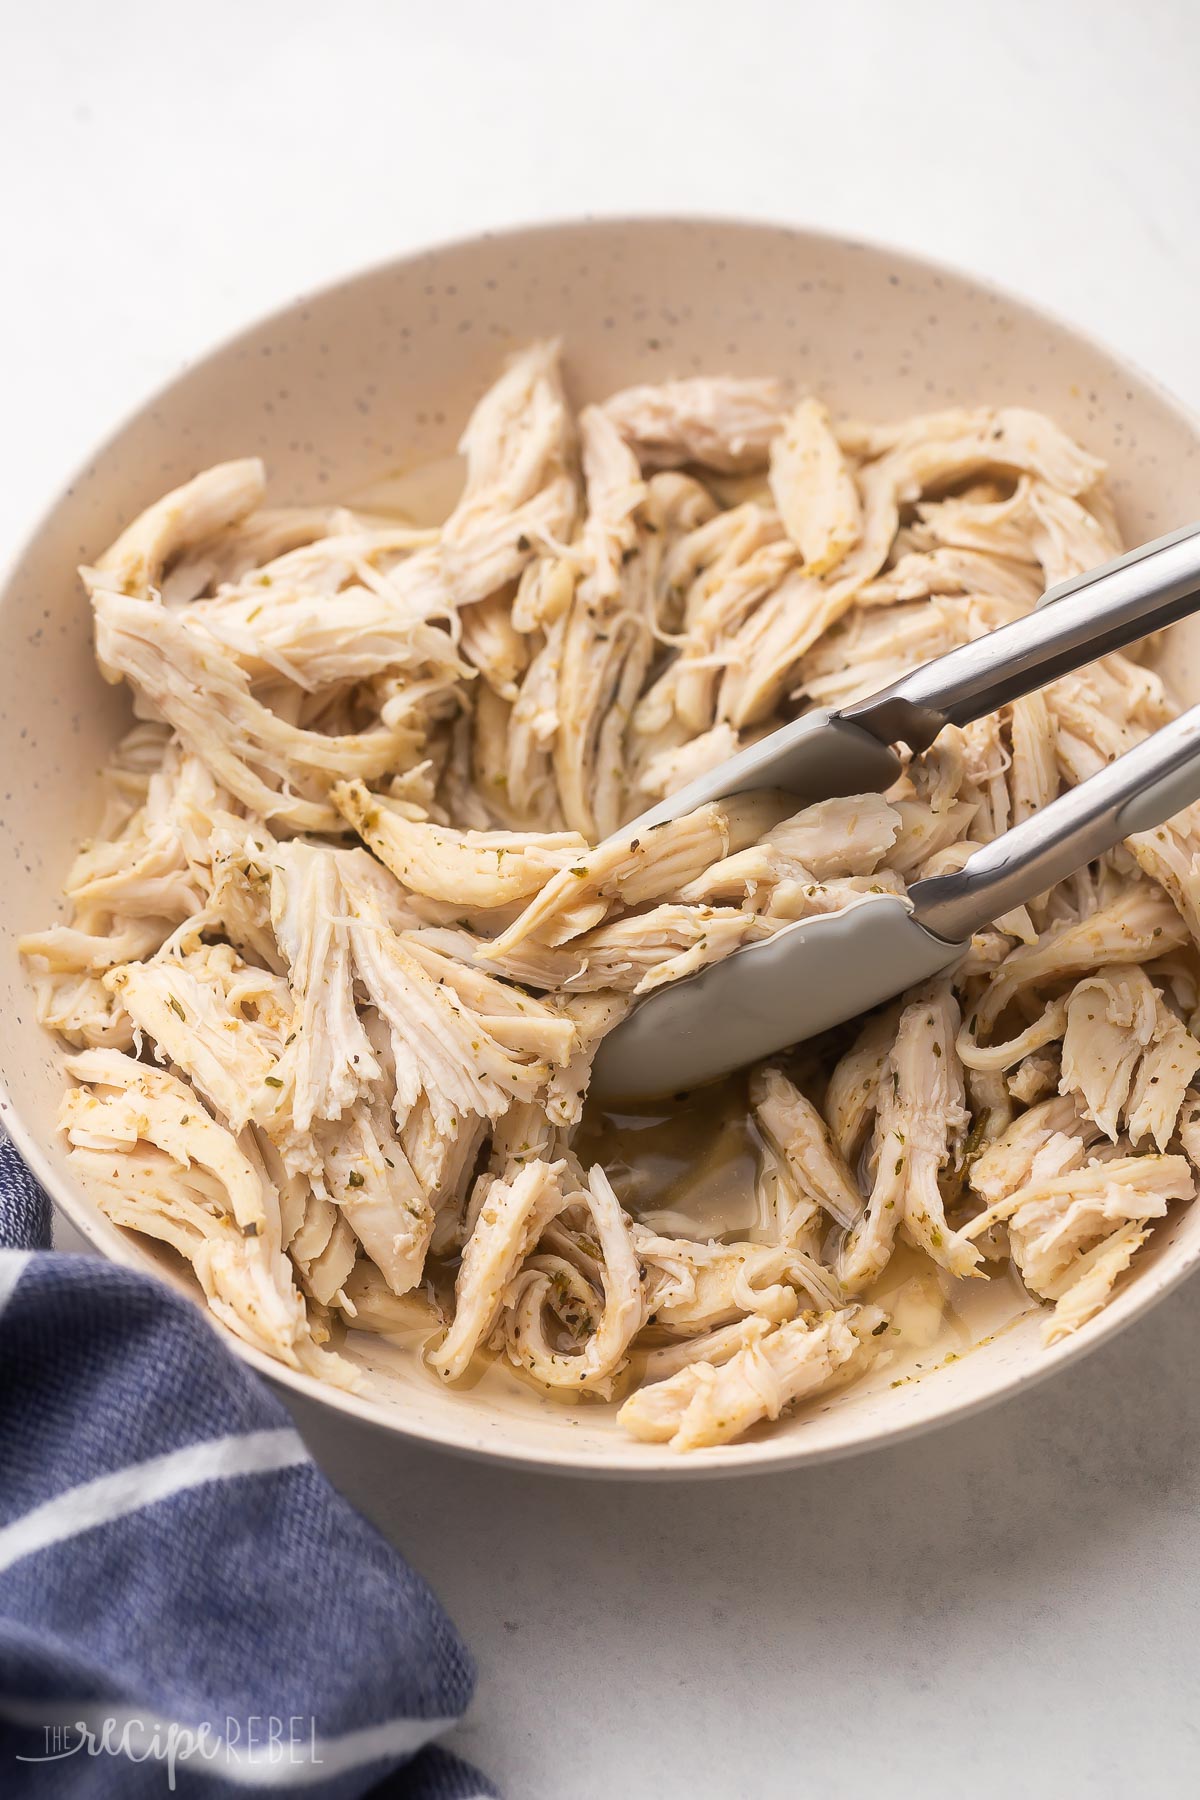 tongs picking up instant pot shredded chicken from bowl.